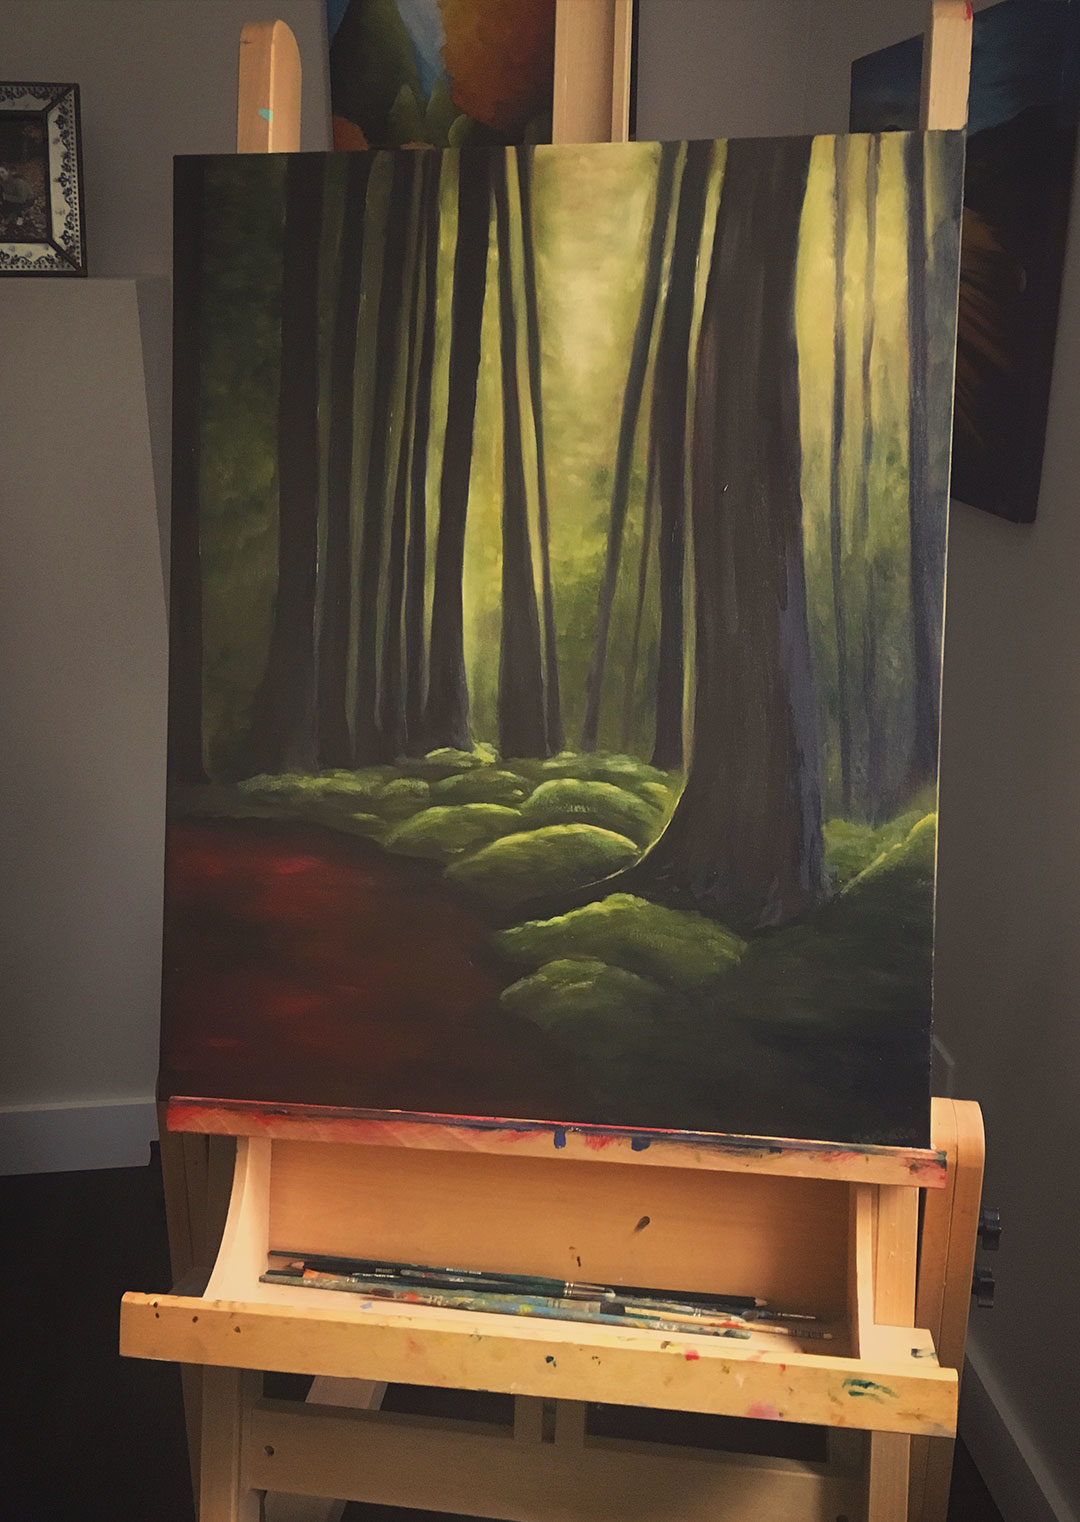 zesty-life-squamish-painting-artist-mental-health-art-therapy-rachelle-hynes